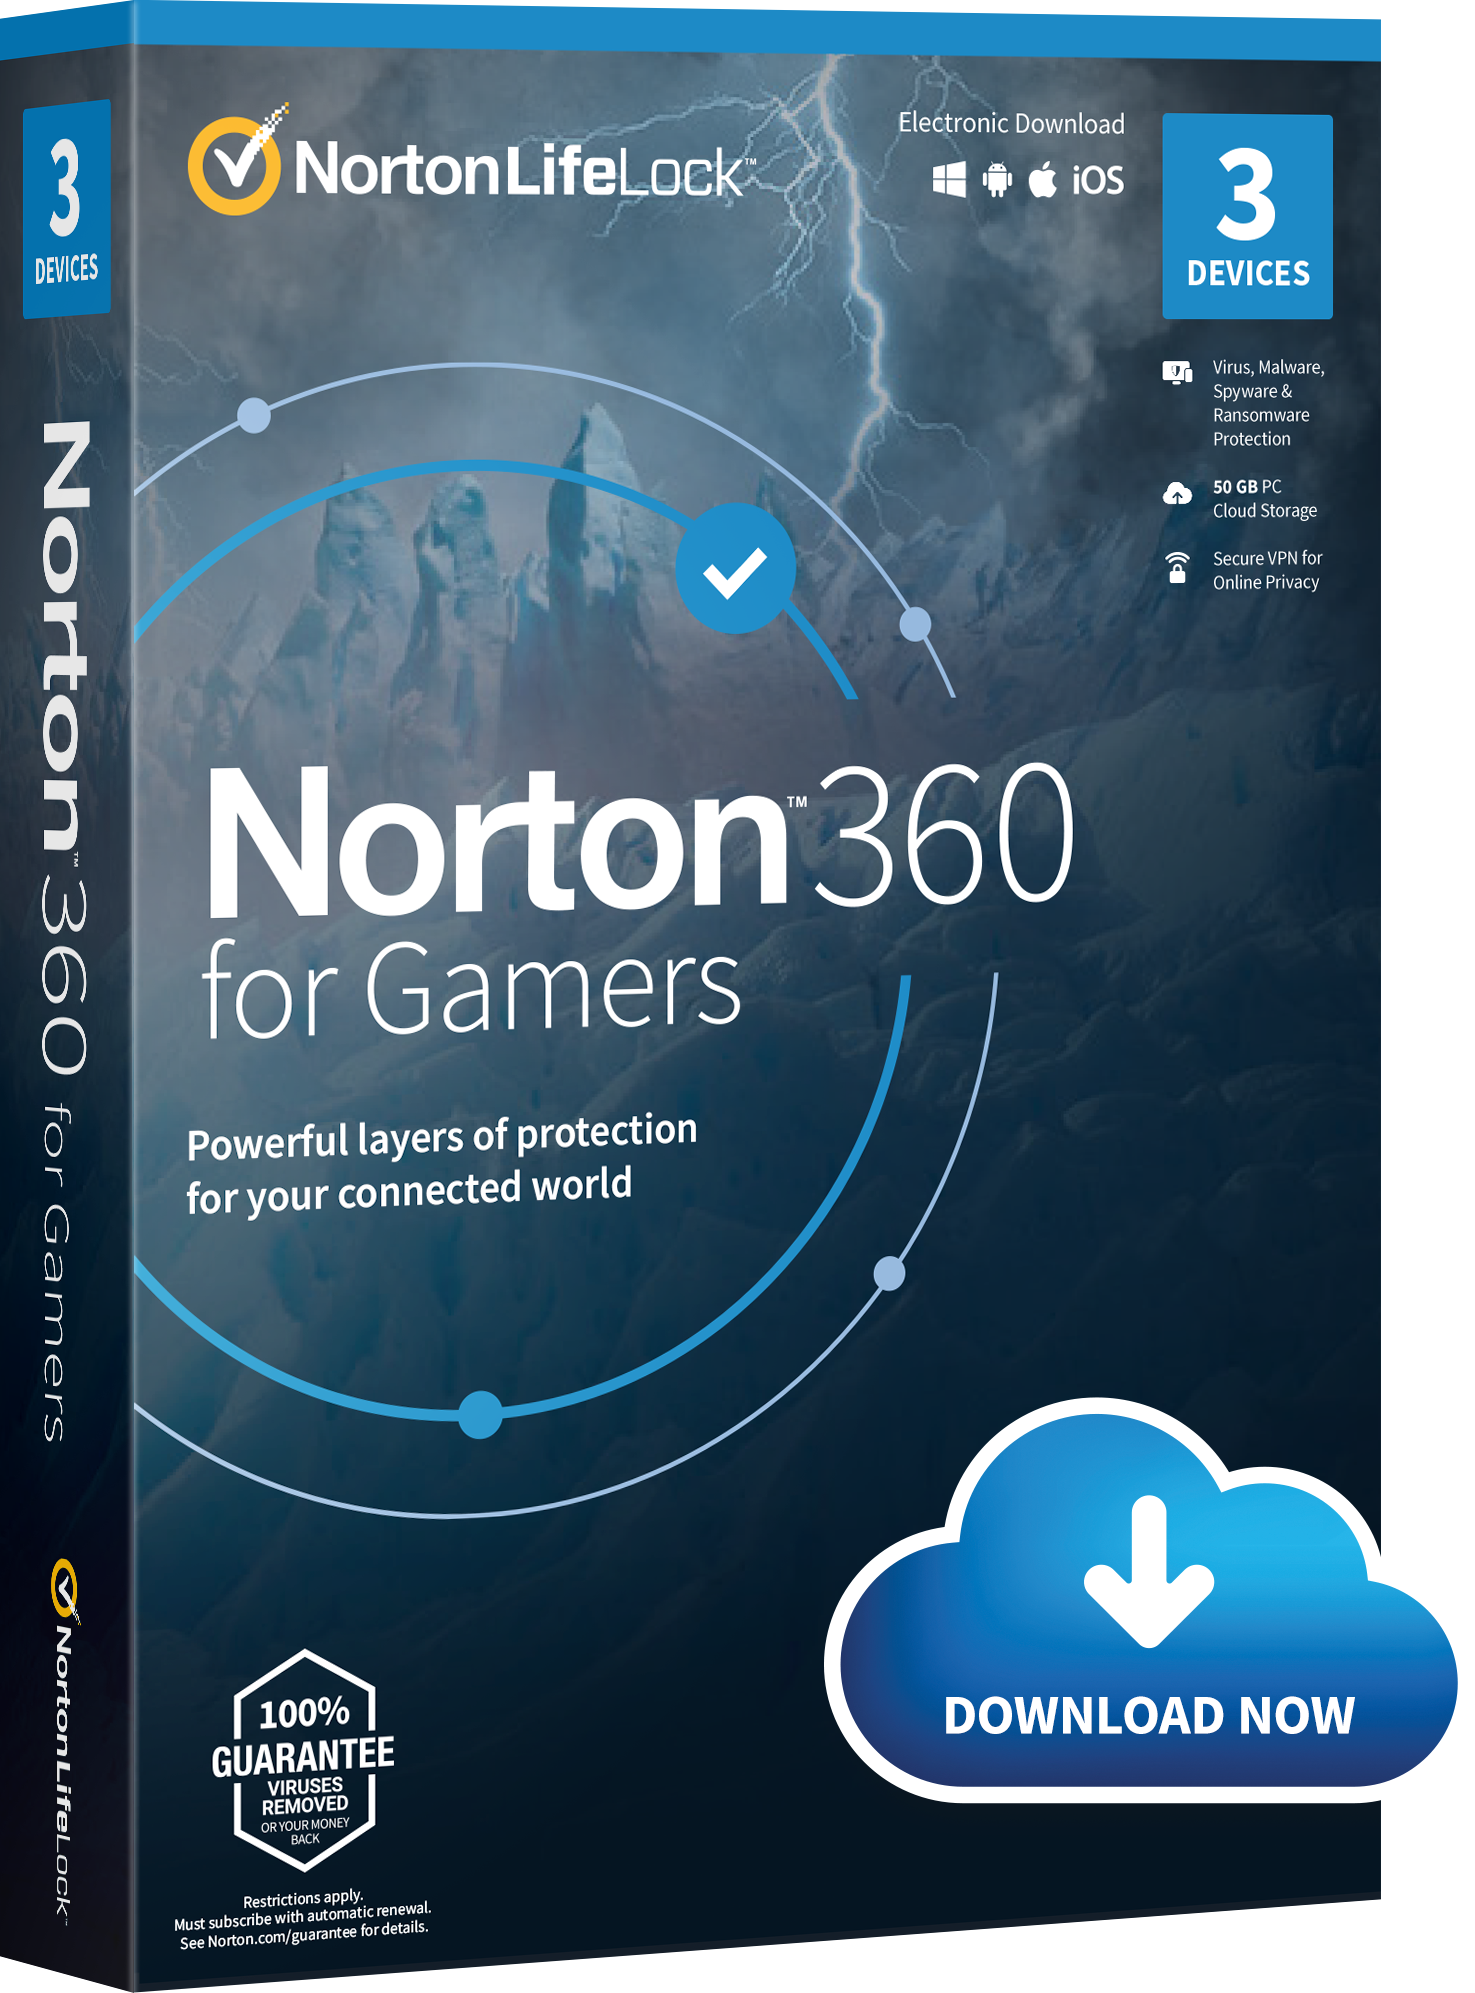 Norton 360 for Gamers: Protect Your Gaming Experience